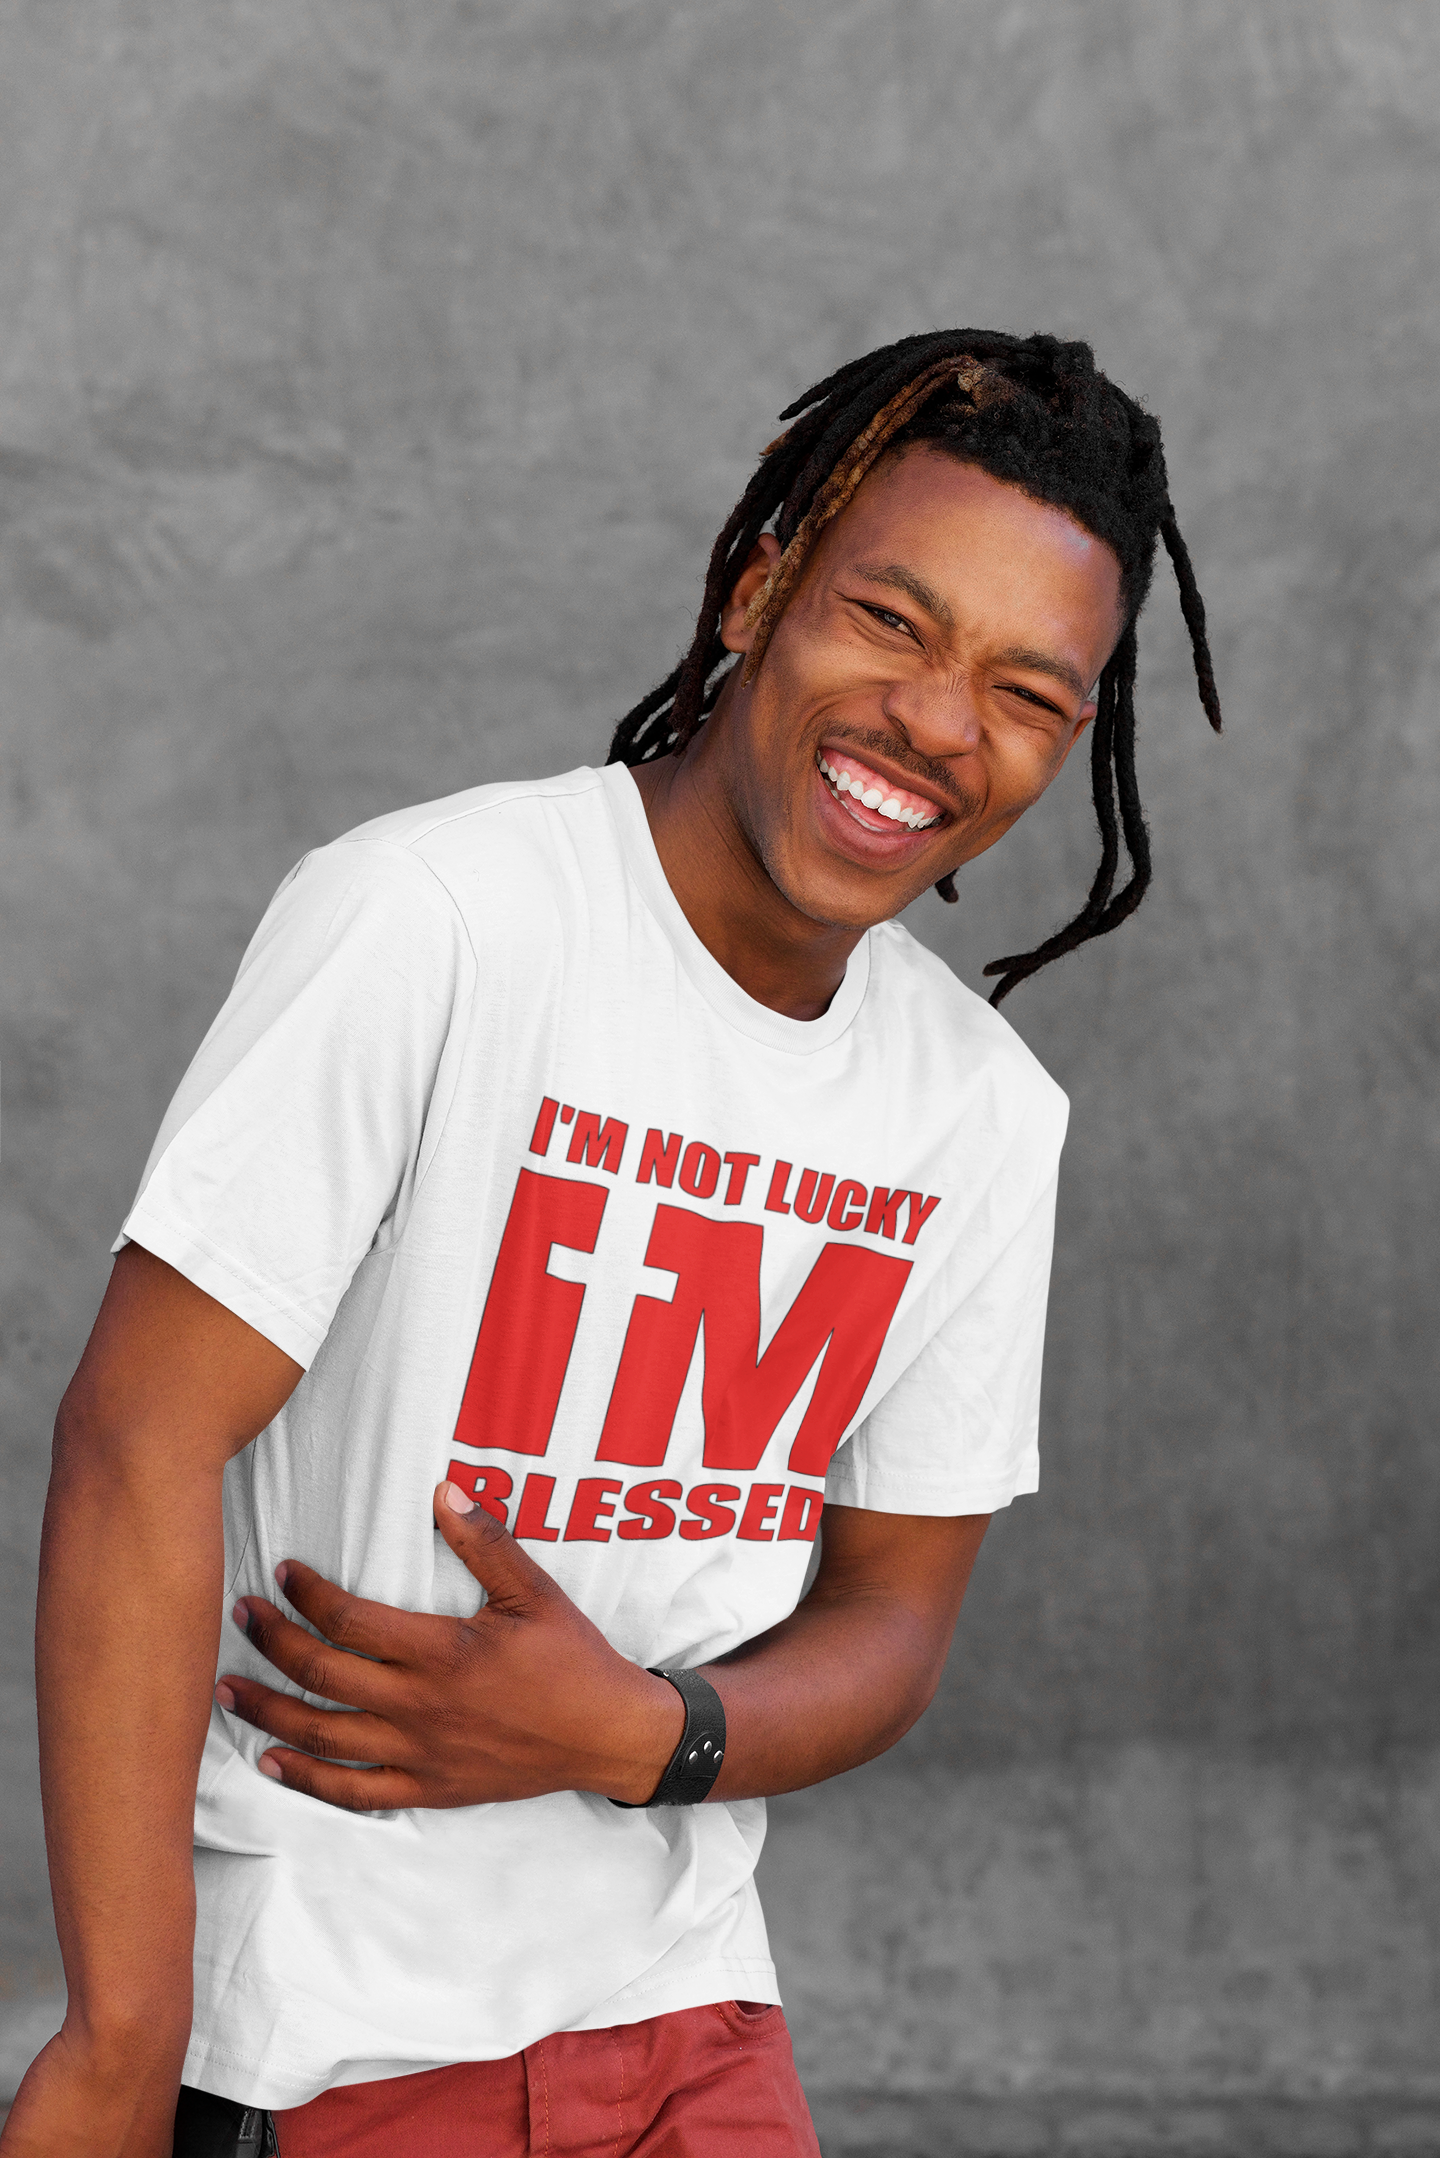 I’m not Lucky I’m Blessed T-Shirt